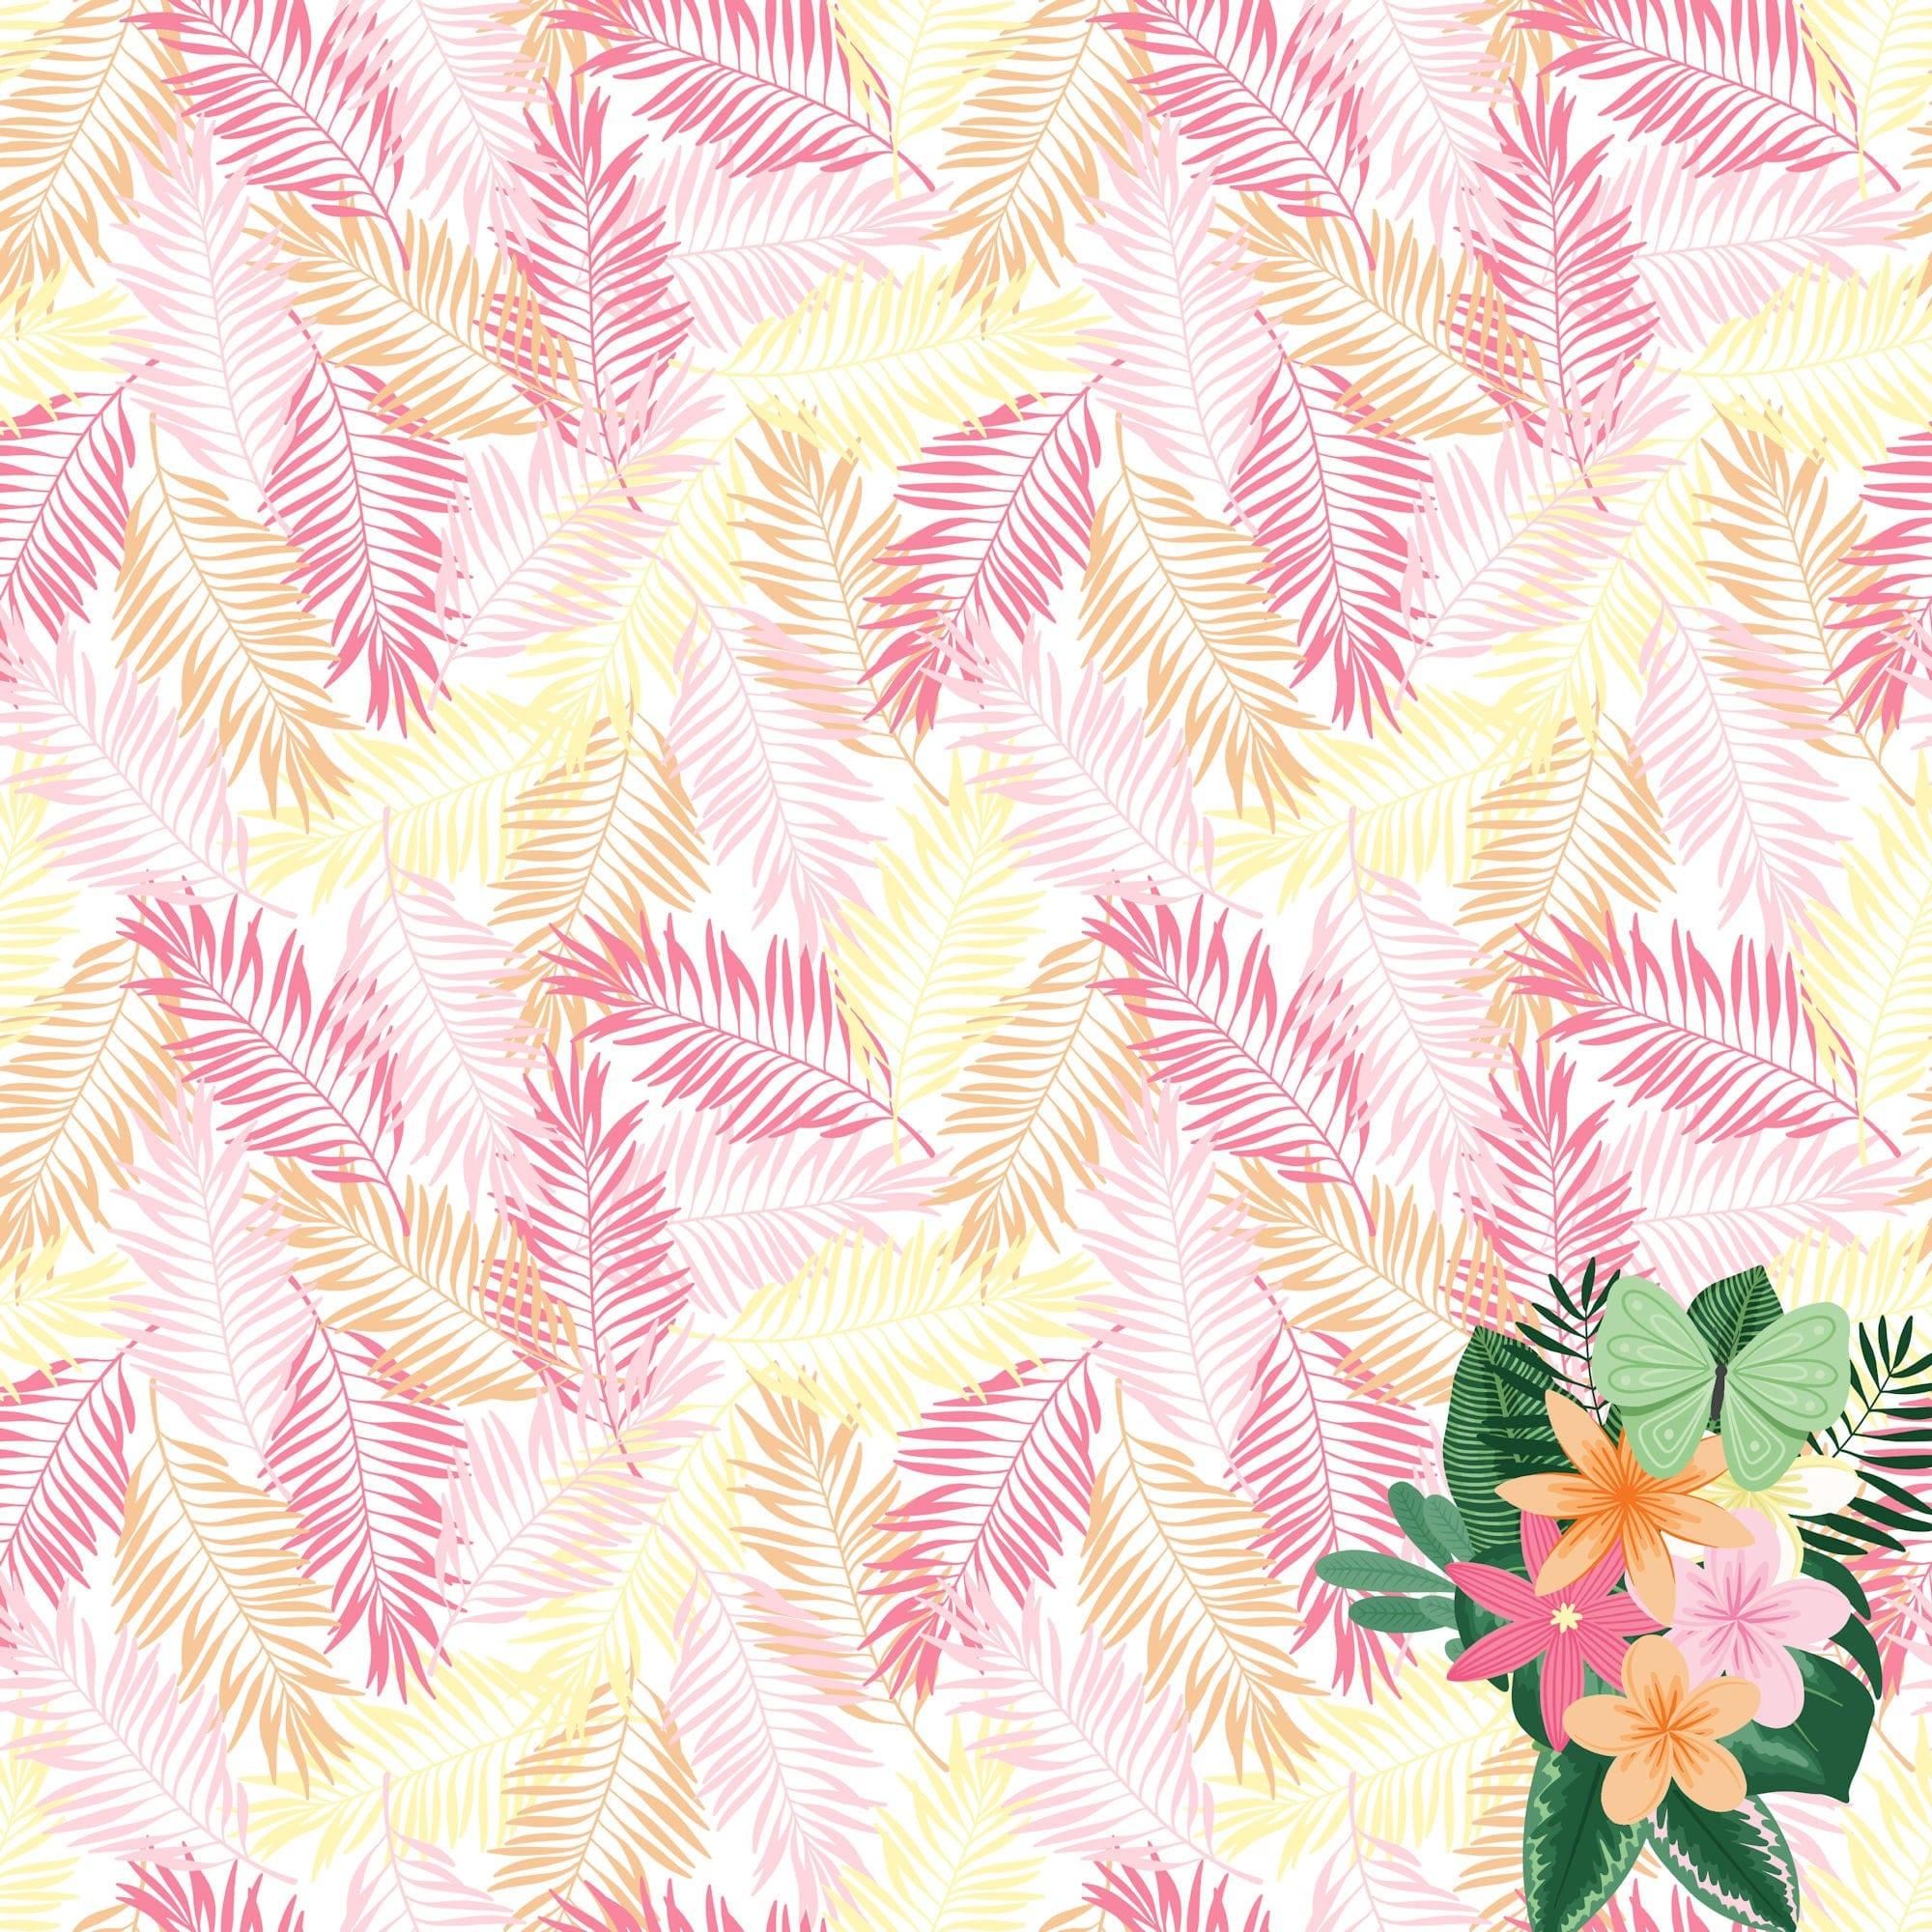 Sunkissed Collection Frilly Ferns 12 x 12 Double-Sided Scrapbook Paper by SSC Designs - Scrapbook Supply Companies